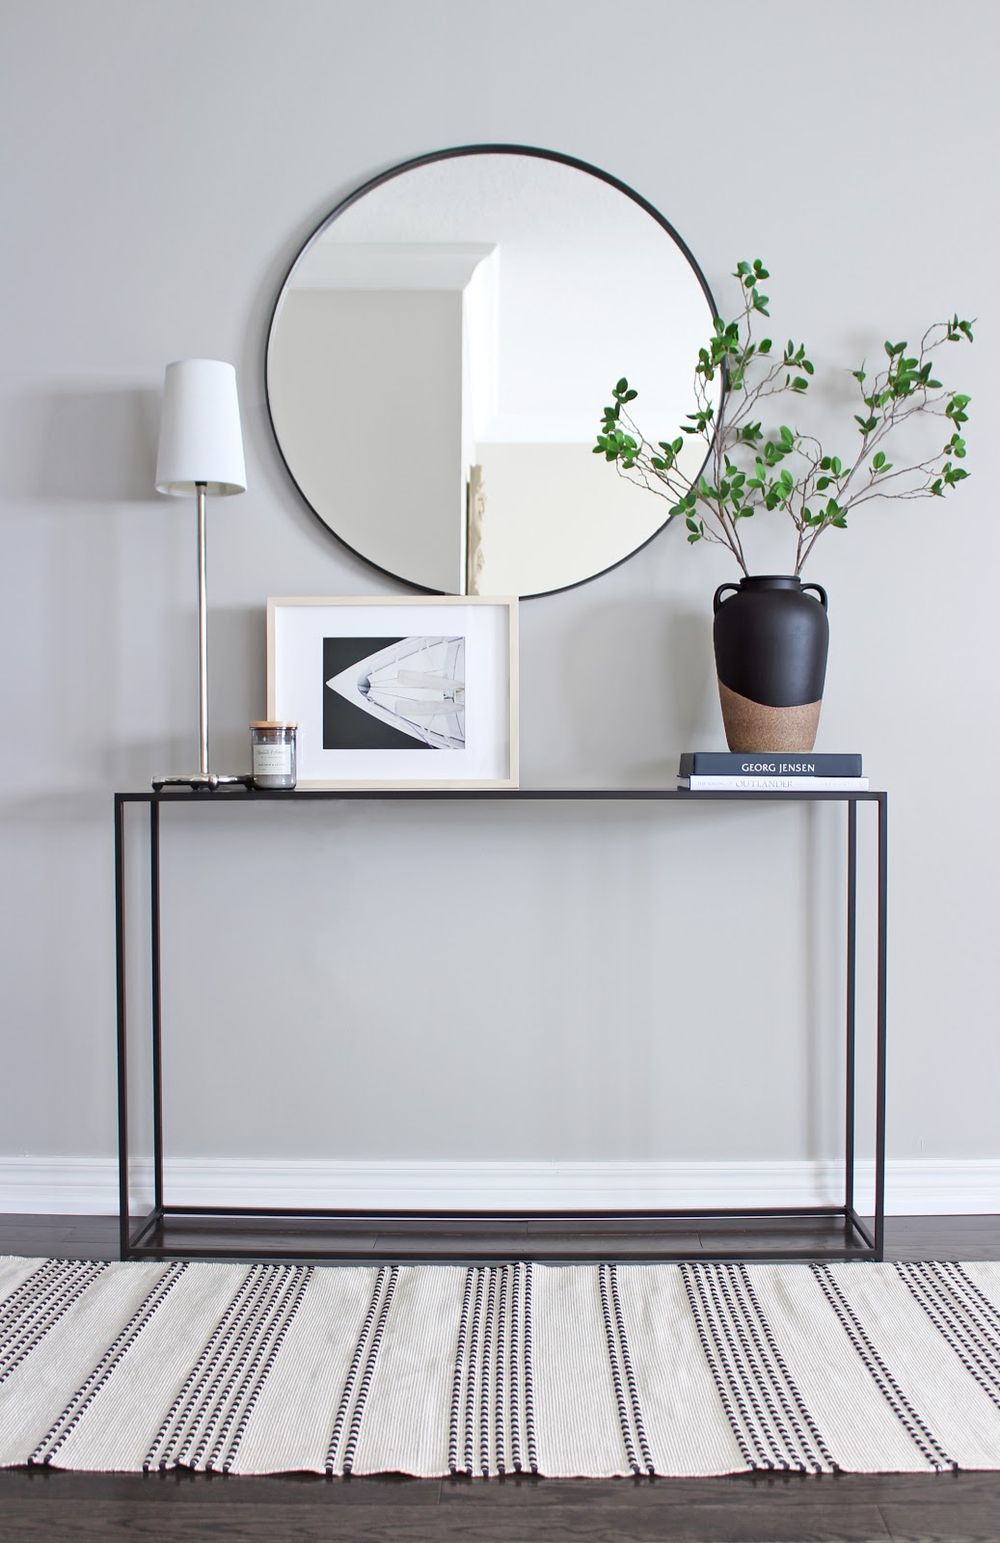 Scandinavian Console Table with round mirror and plants via amdolcevita